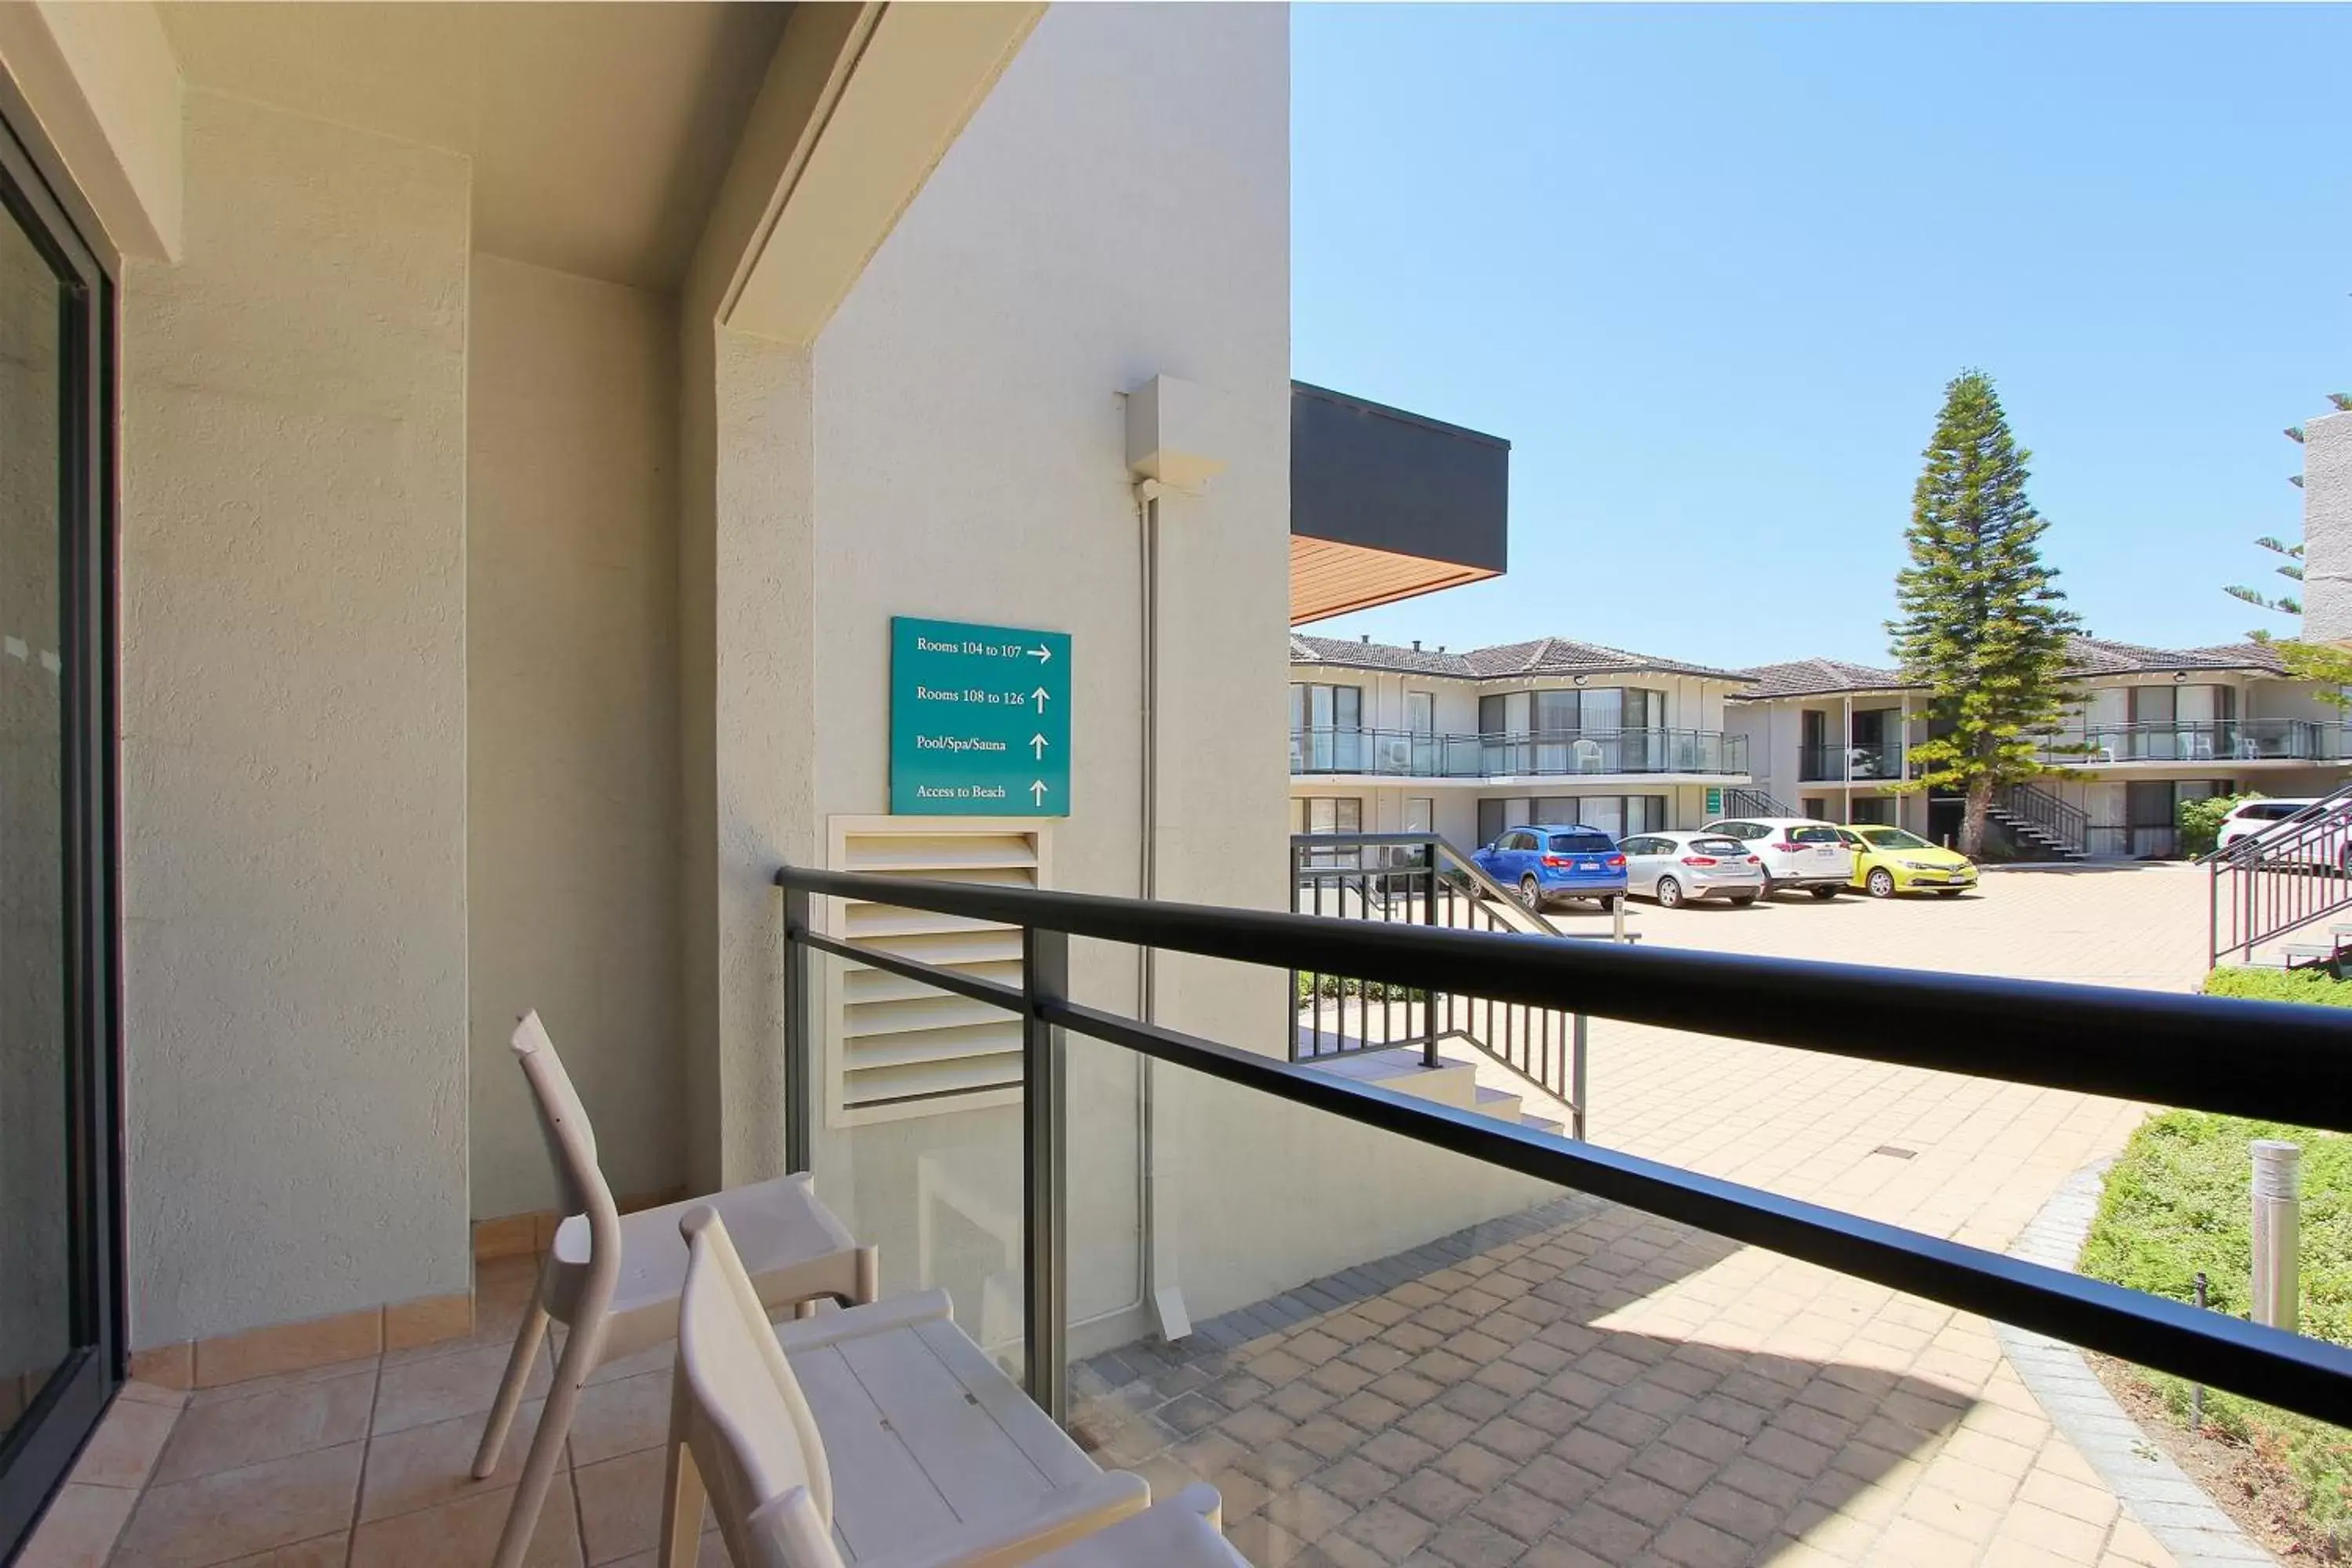 Property building in Quality Resort Sorrento Beach